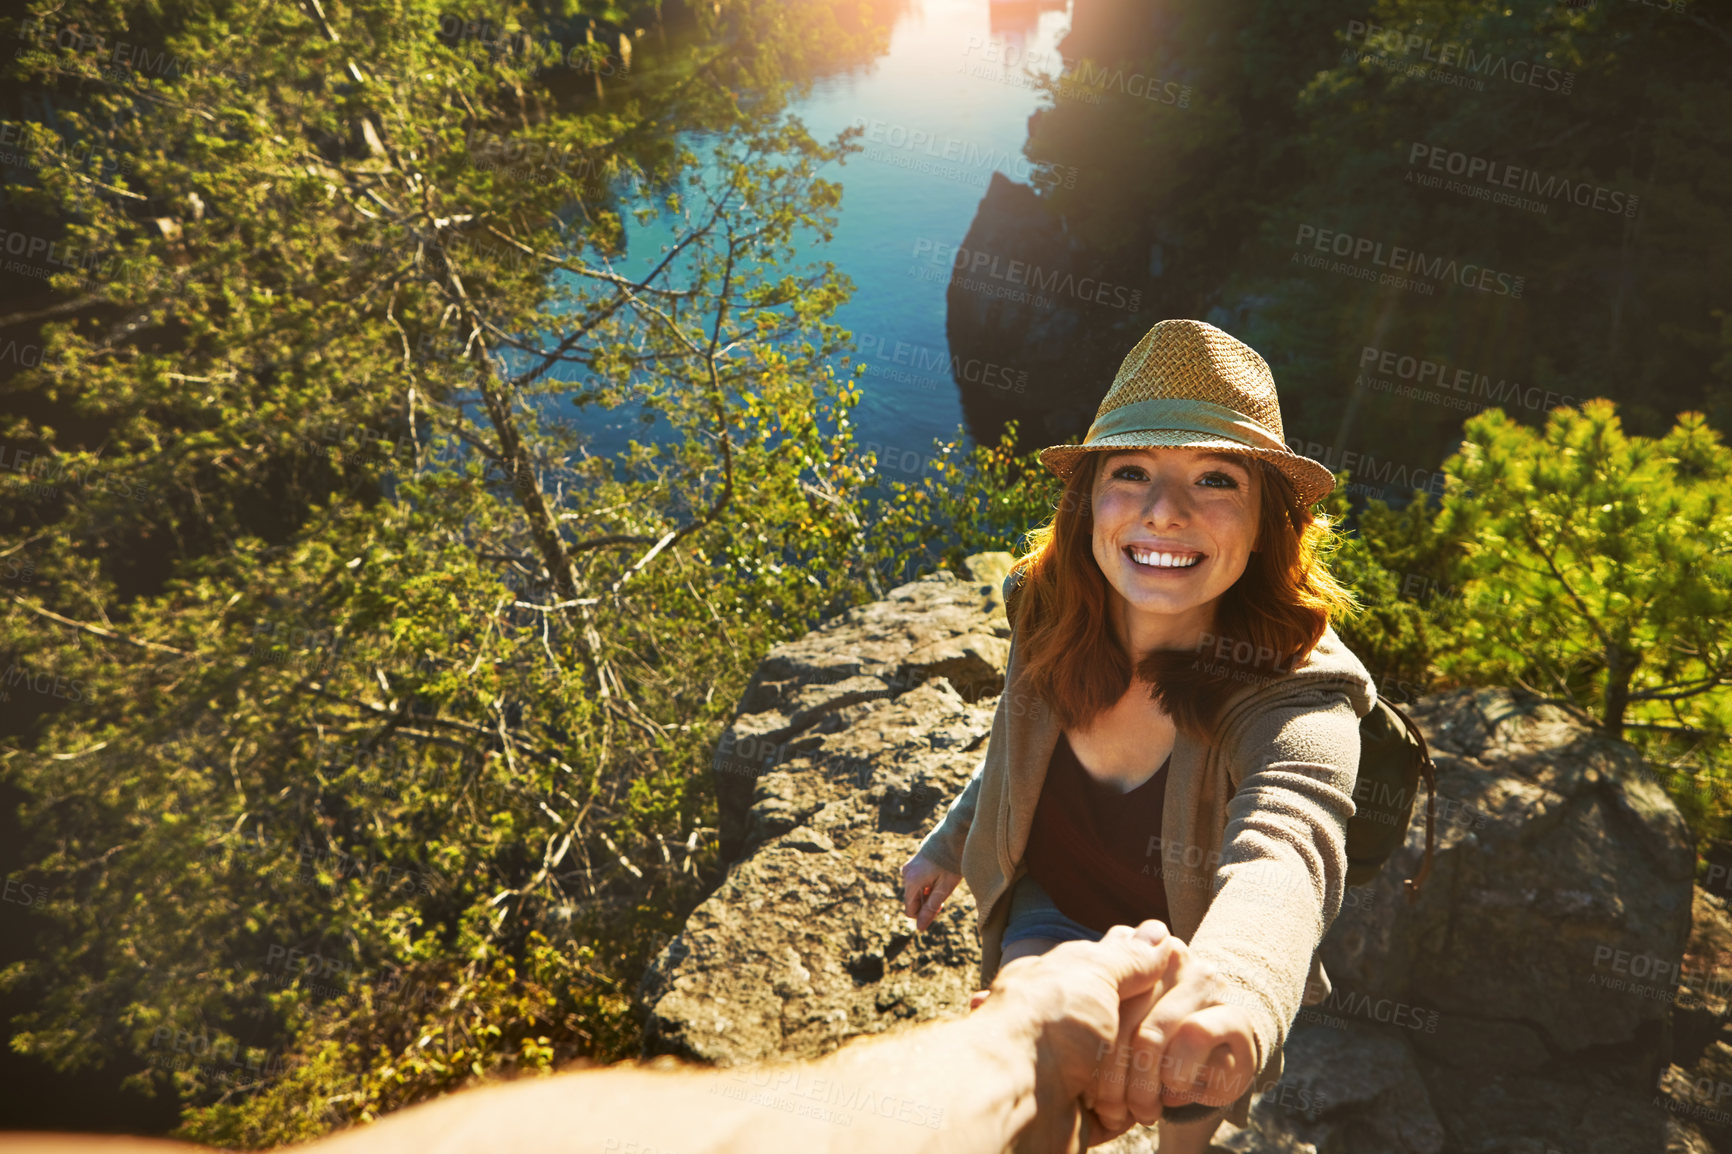 Buy stock photo Shot of a young couple out on an adventurous date in the mountains